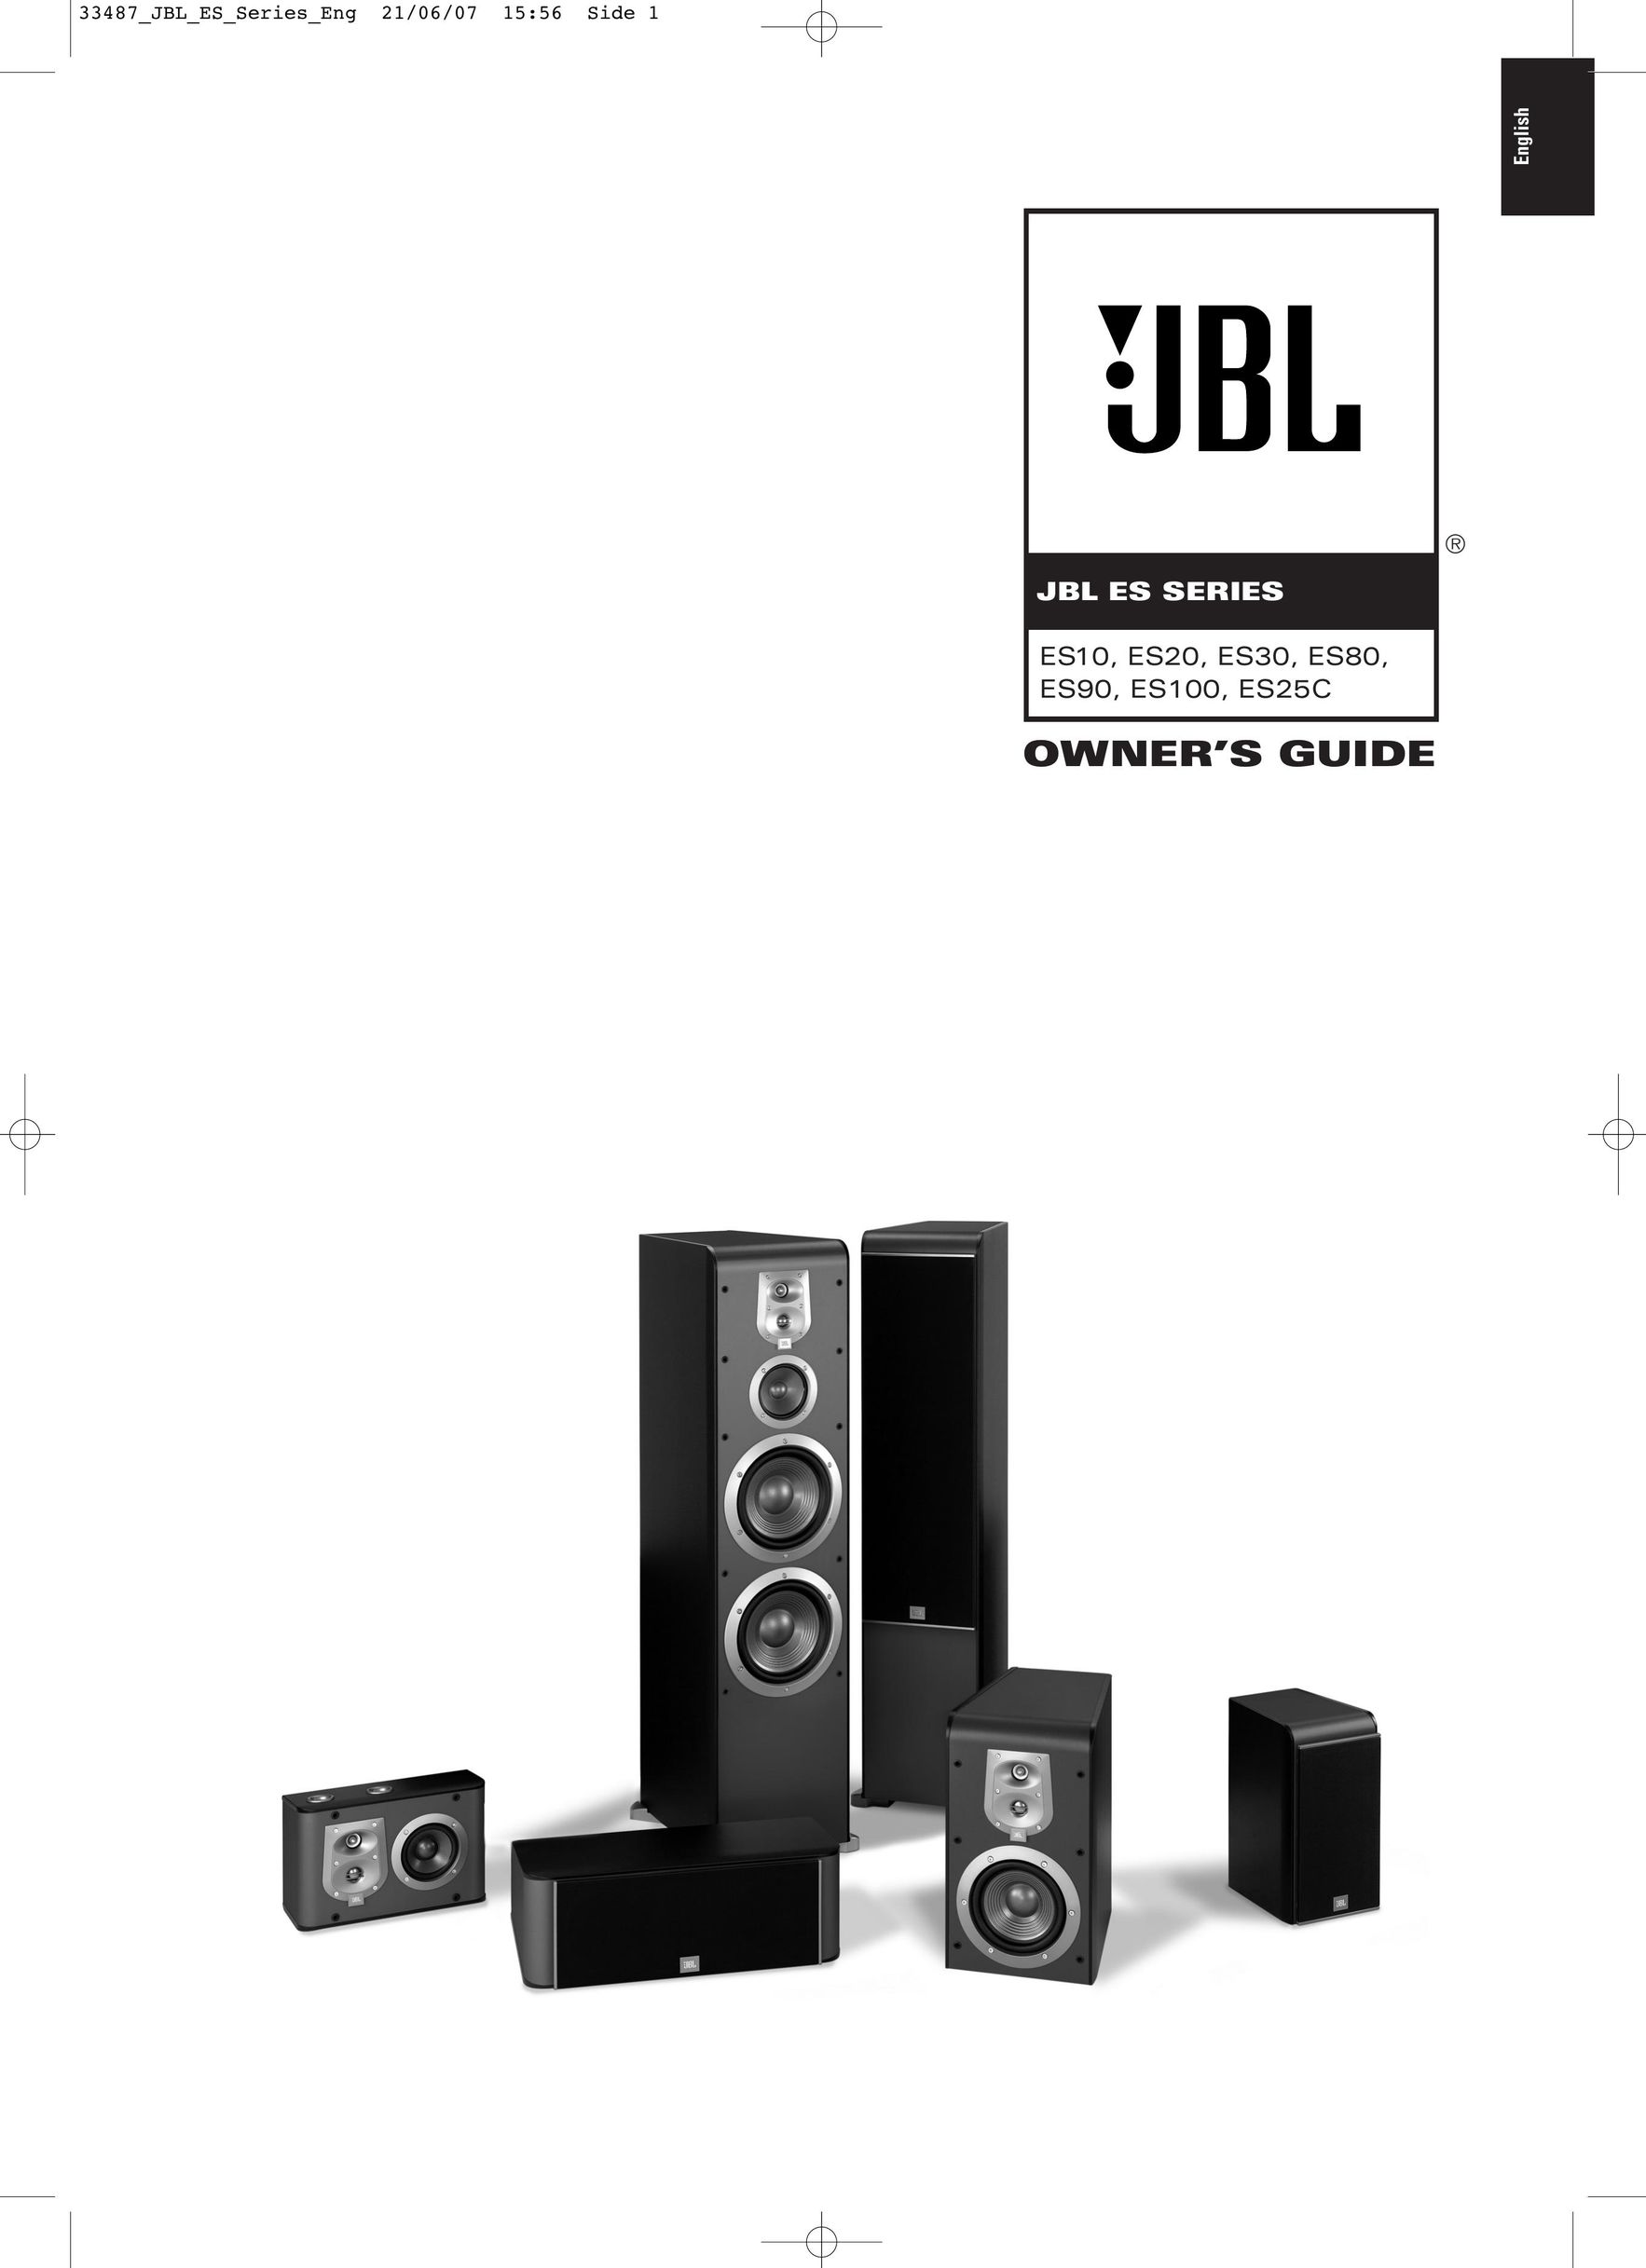 JBL ES30 Home Theater System User Manual